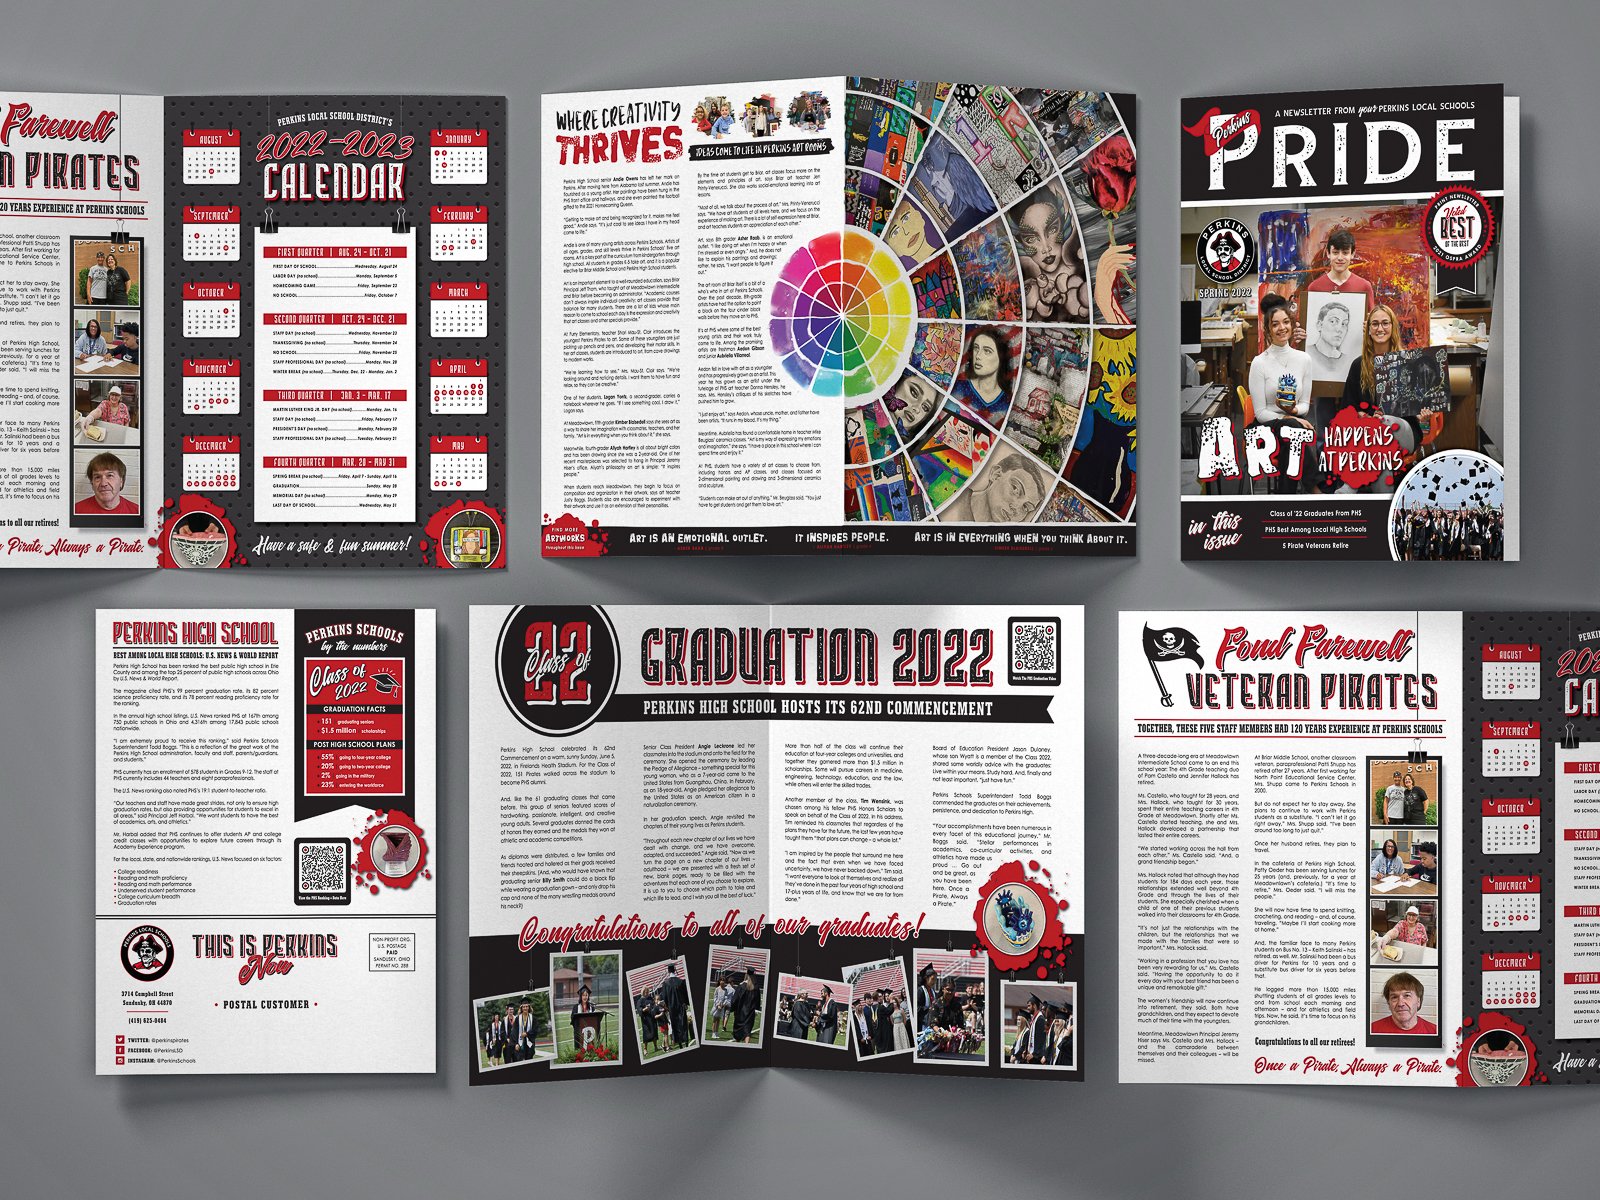 Award winning newsletter design created quarterly for the school district.